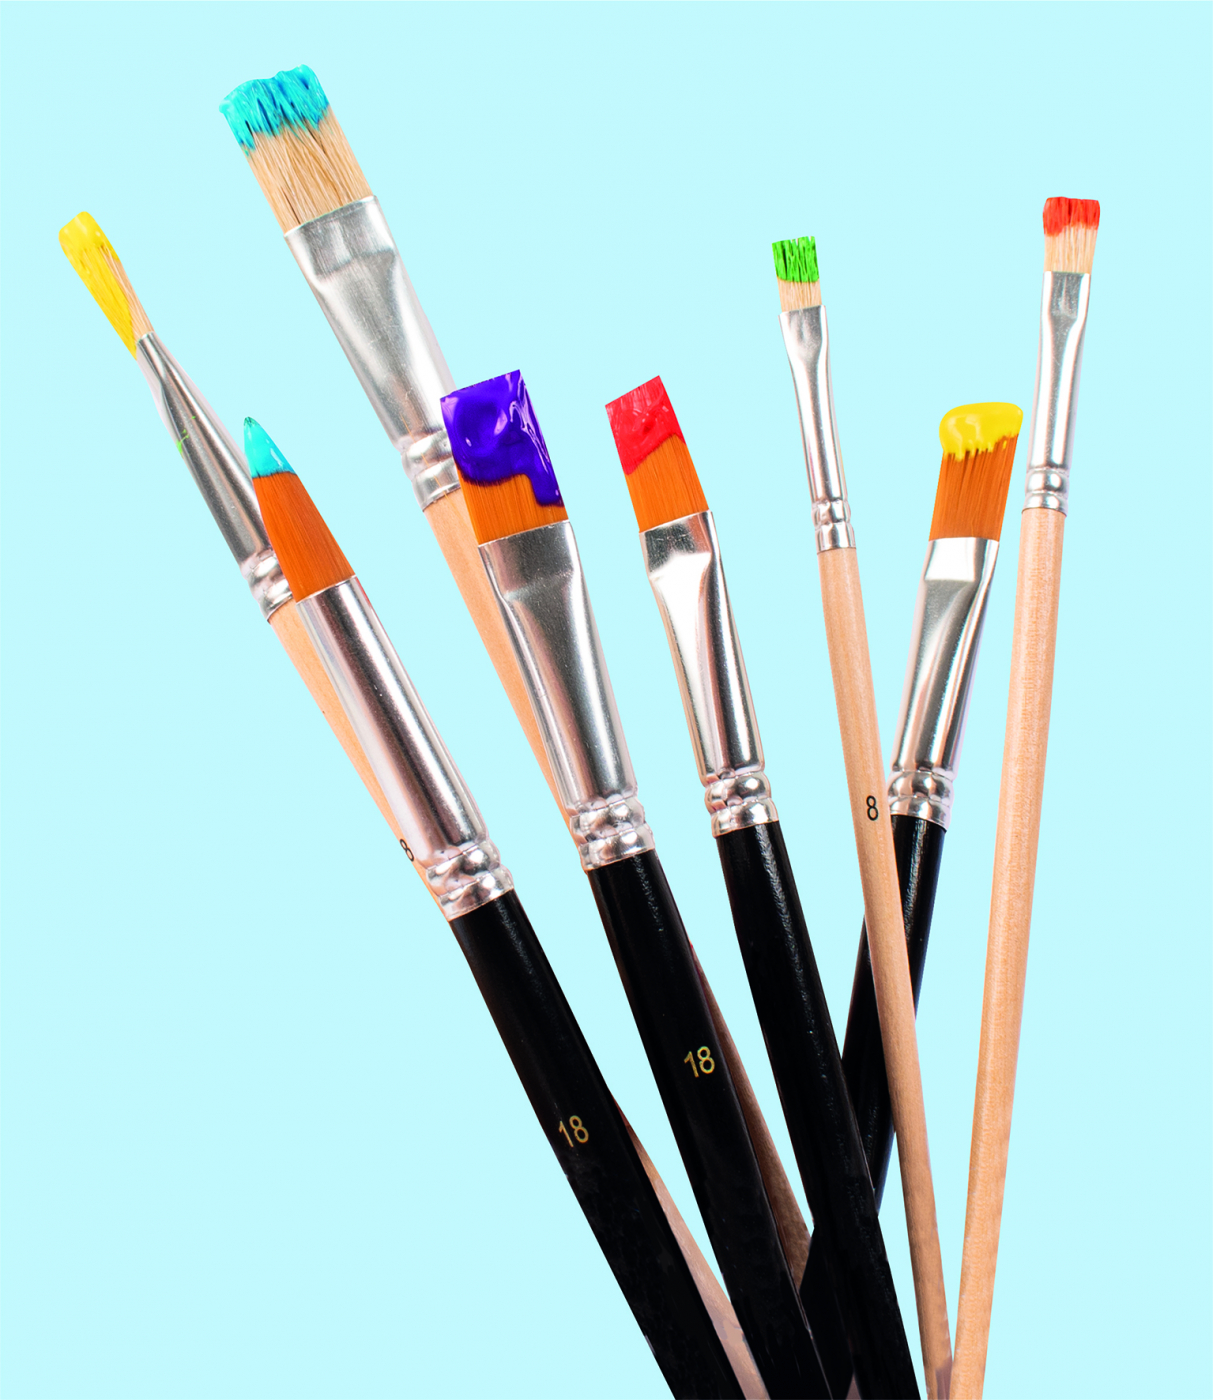 Sytntetic Brush 20 pcs in the group Kids / Kids' Paint & Crafts / Paint Brushes for Kids at Pen Store (126855)